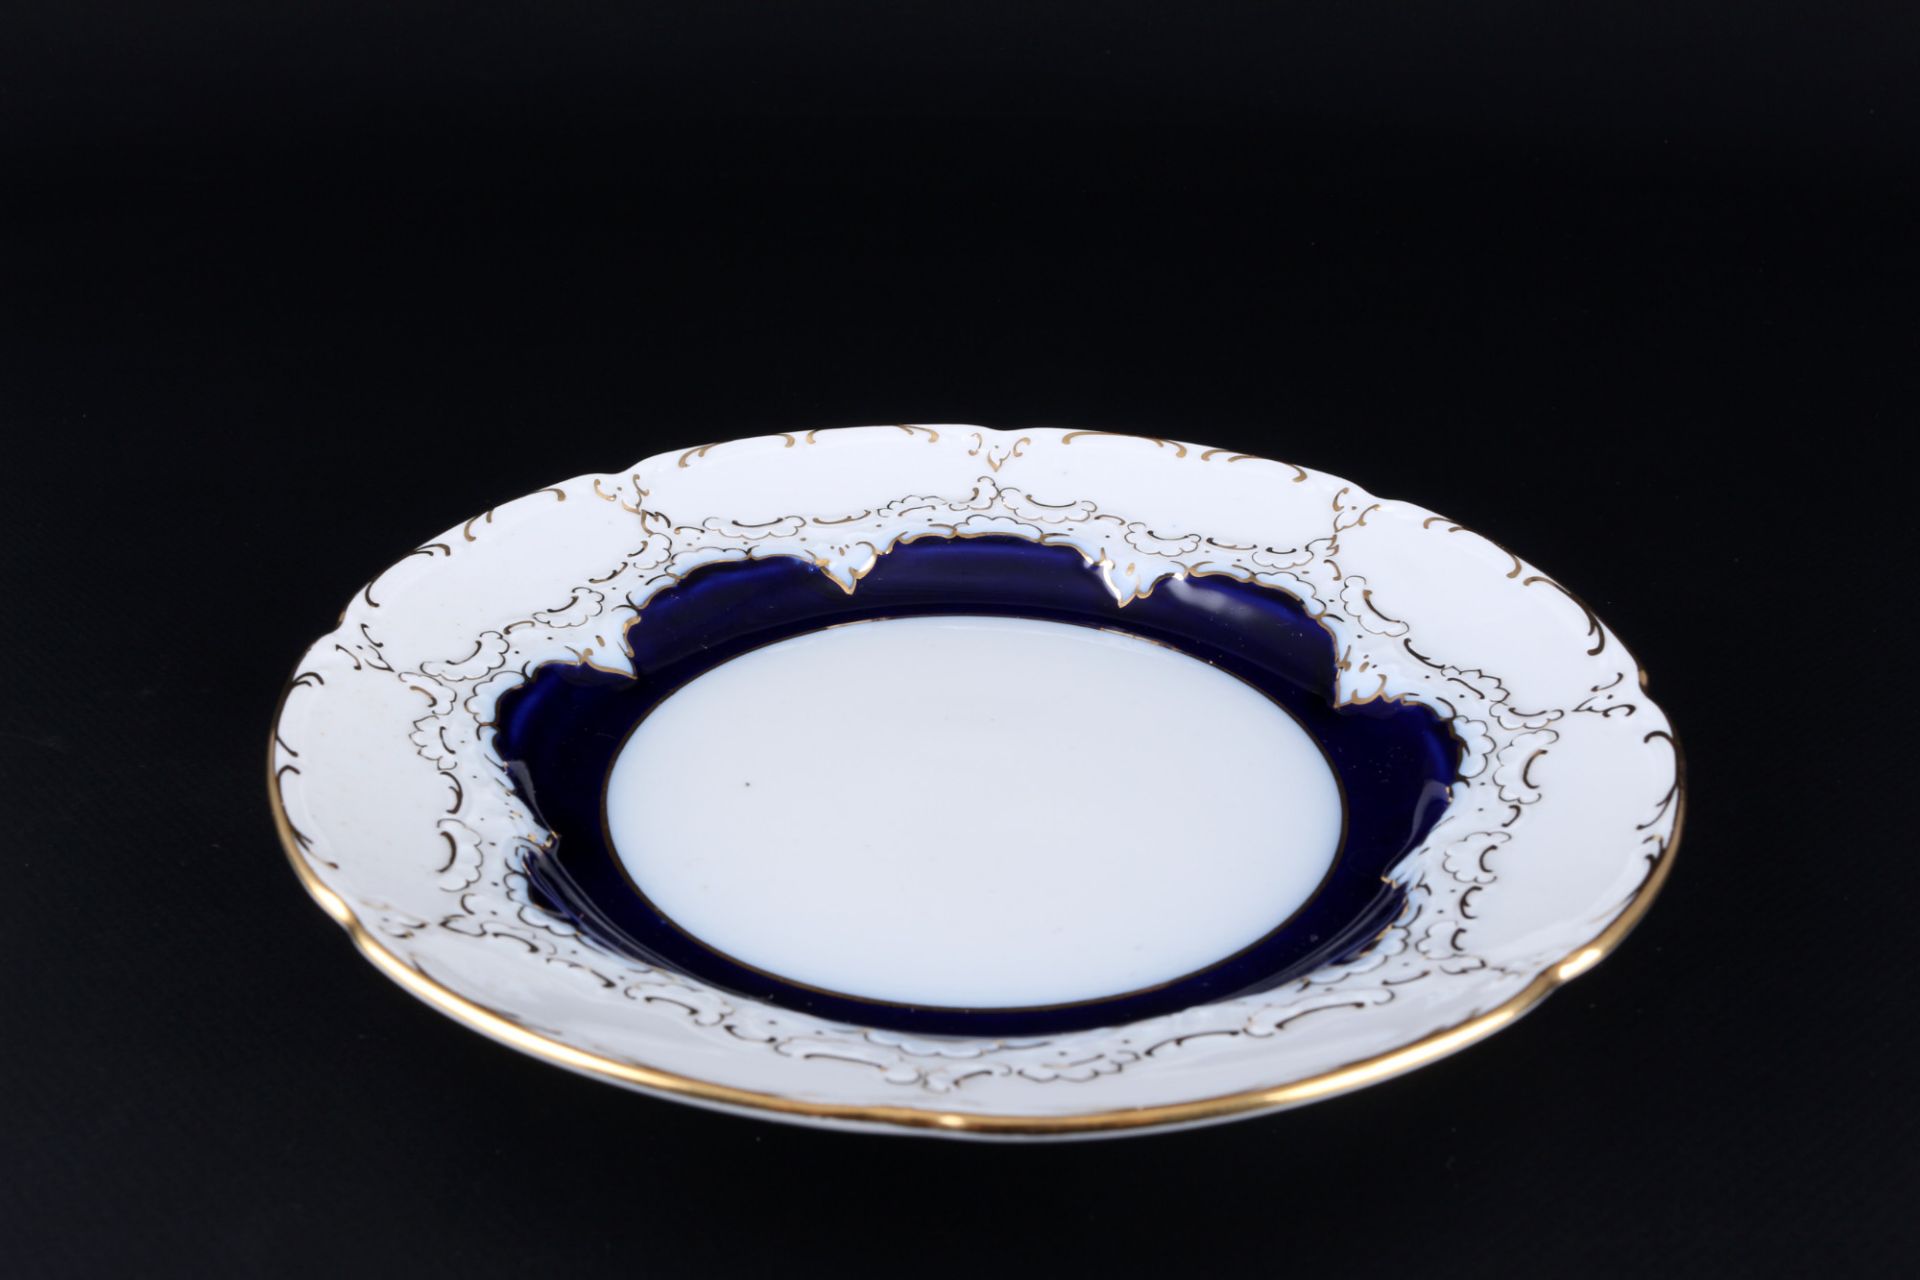 Meissen B-Form royal blue coffee cup with dessert plate 1st choice, Kaffeegedeck 1.Wahl, - Image 5 of 7